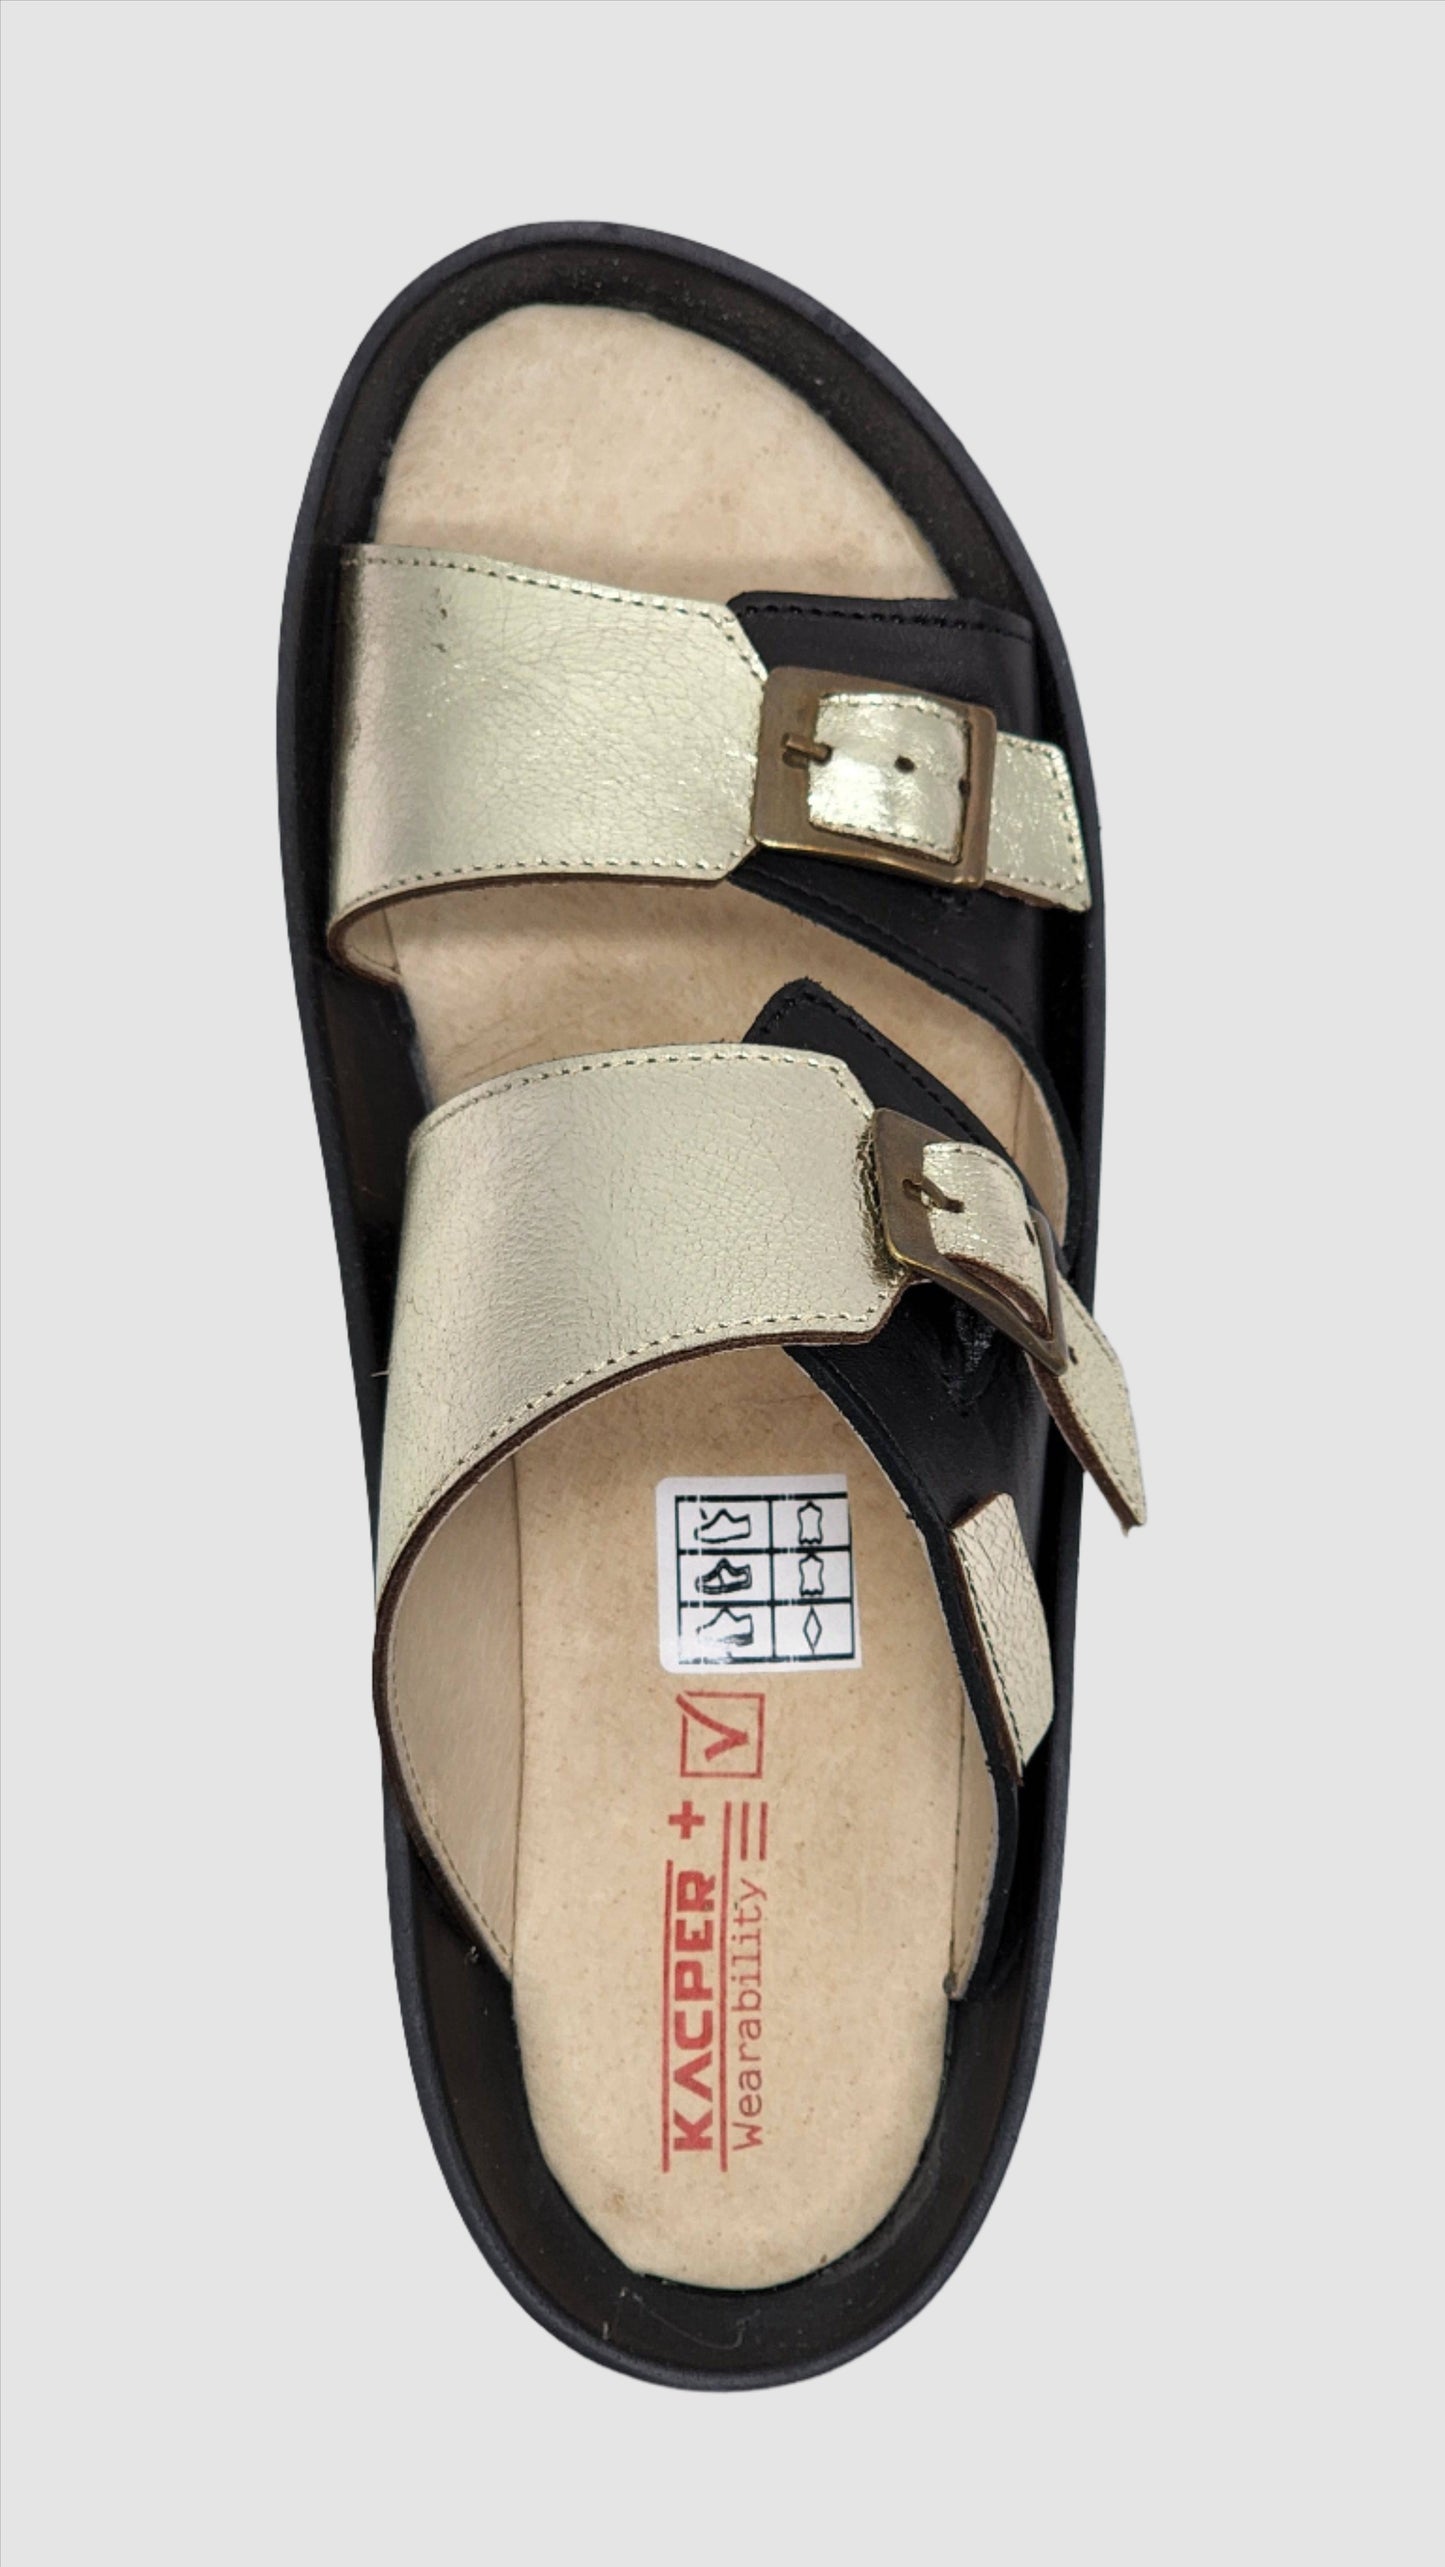 [Women's Signature Leather Sandals] - Kacper Global Shoes 